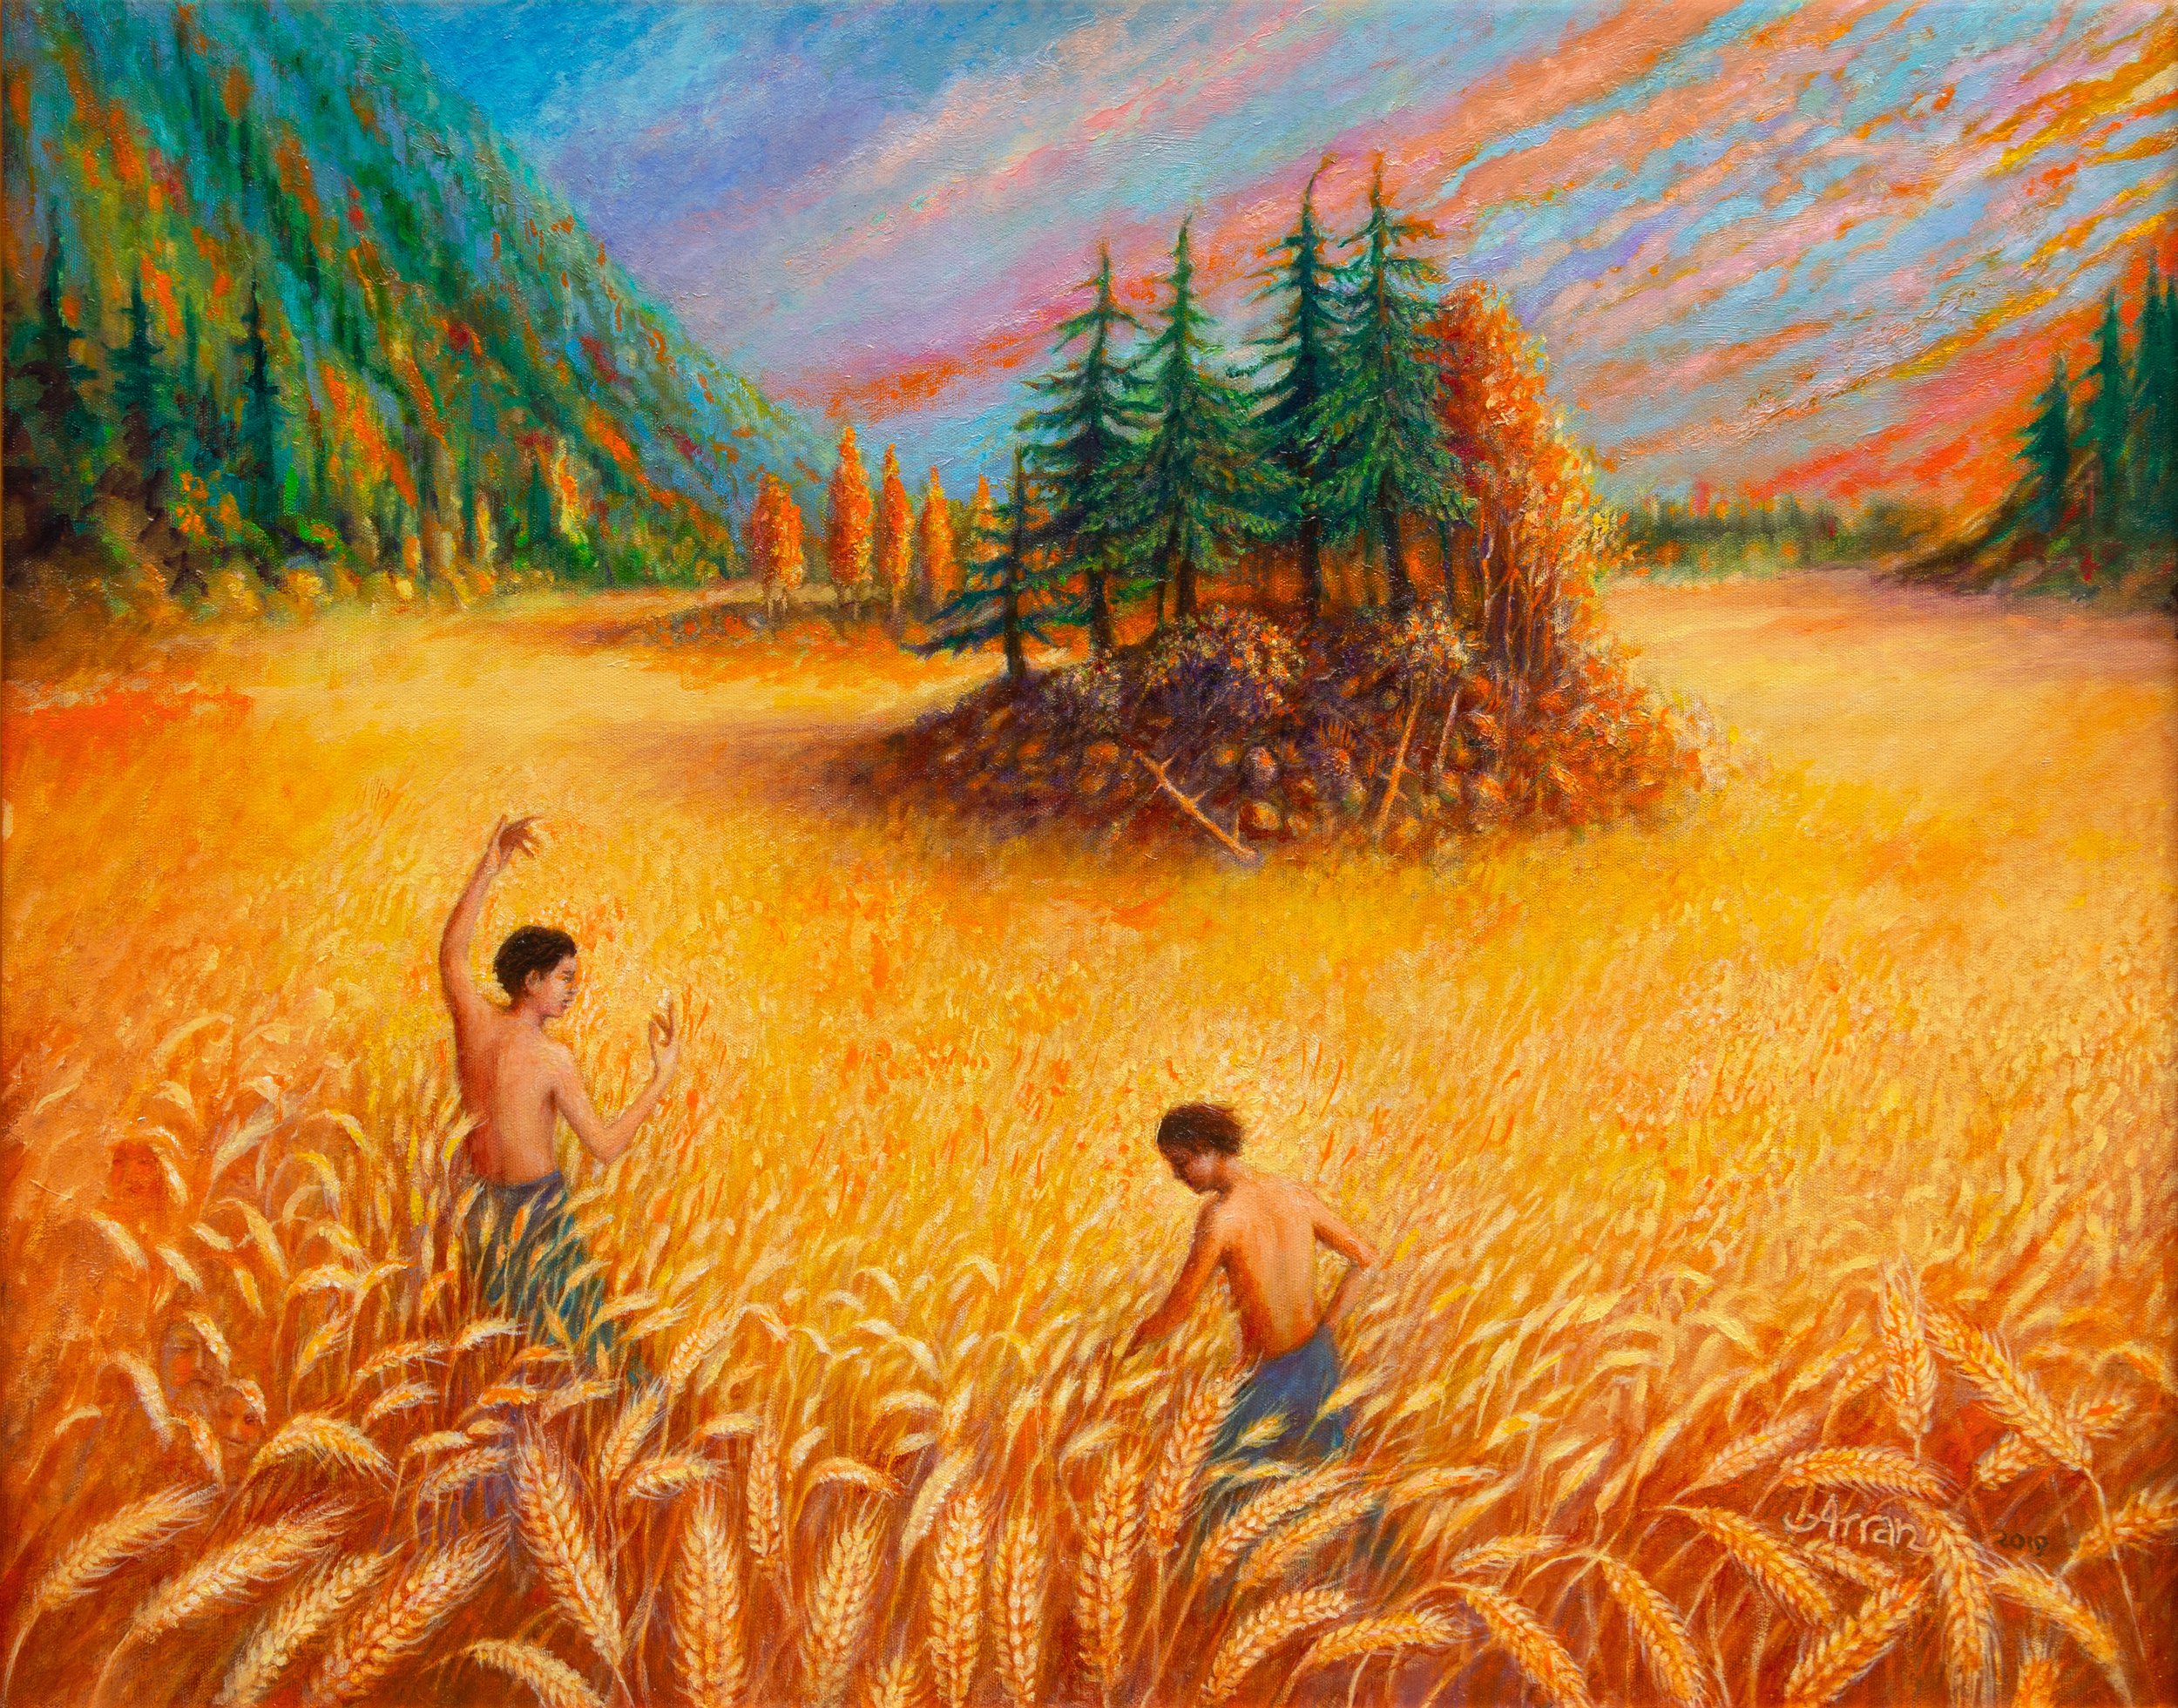 Brothers Running Through a Wheatfield—A Goldstream Memory